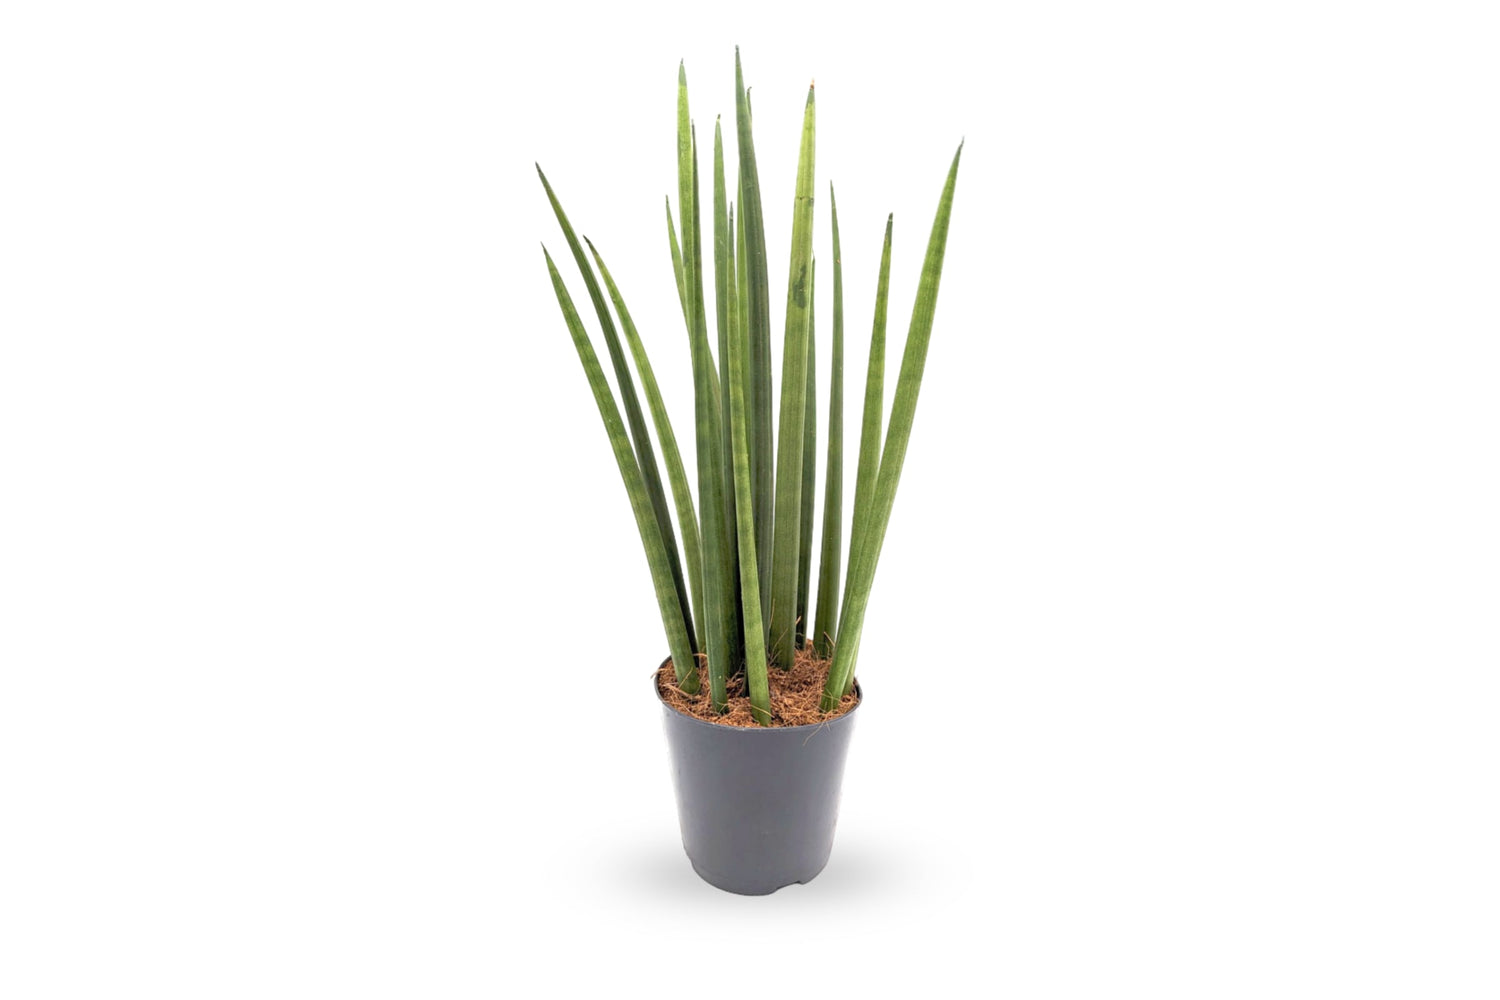 Why is the Sansevieria Mikado the perfect house plant for beginners?